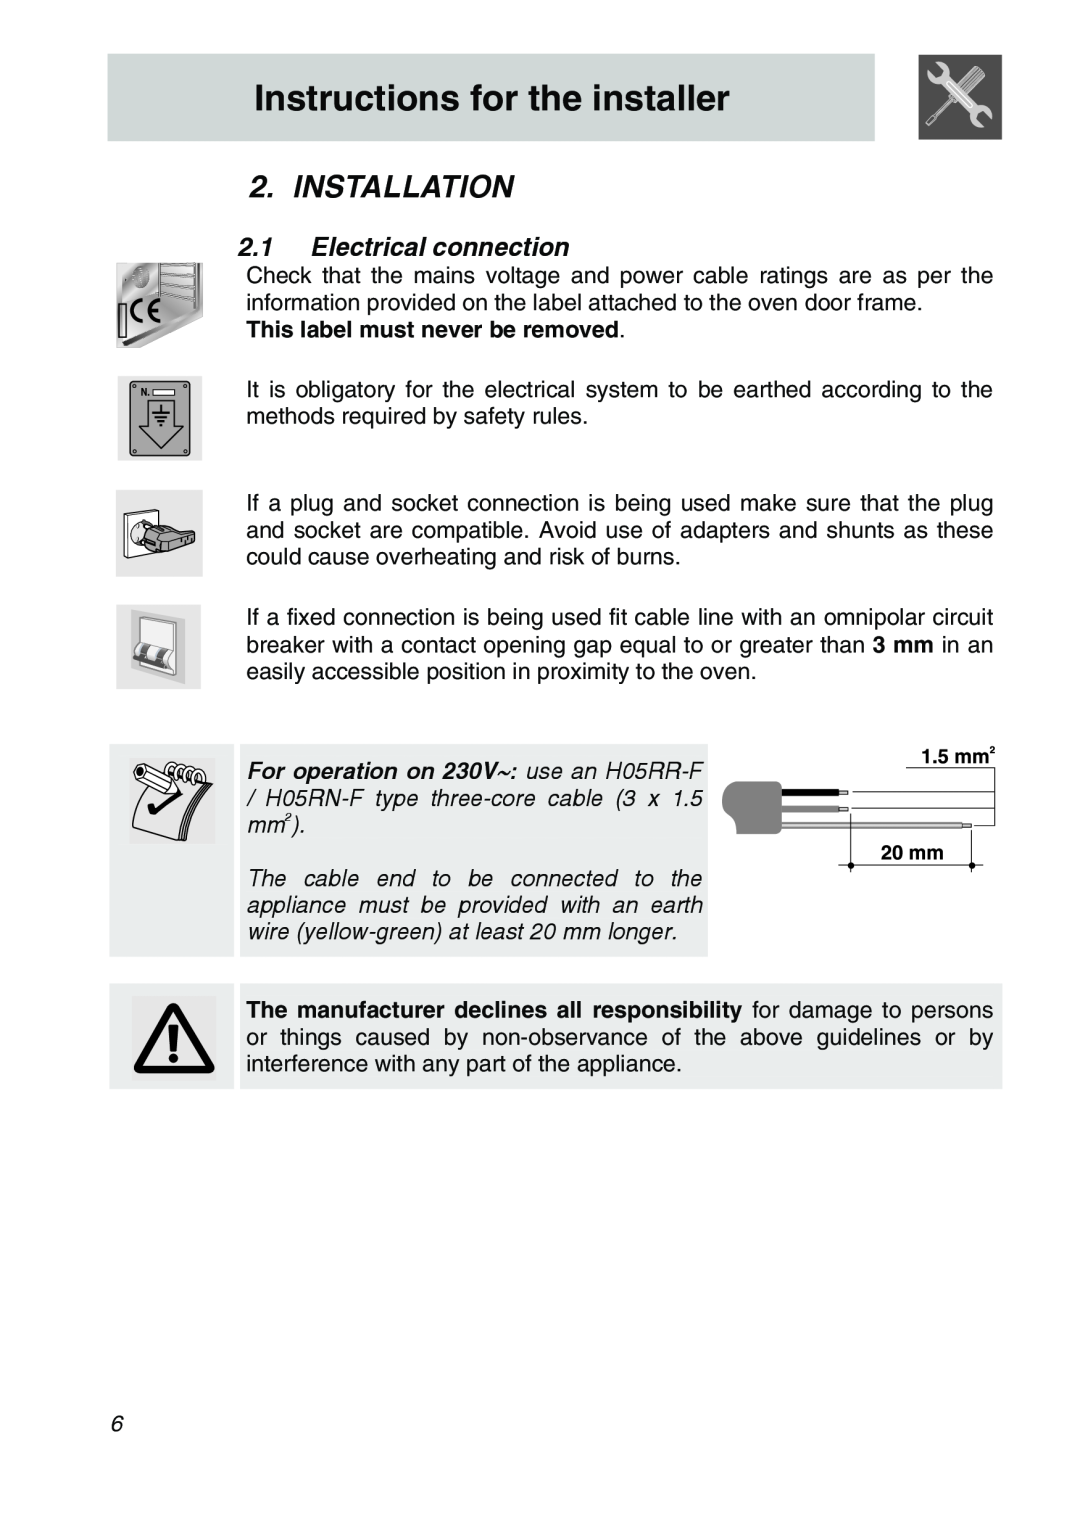 Smeg SCA310X Instructions for the installer, Installation, 2.1Electrical connection, This label must never be removed 